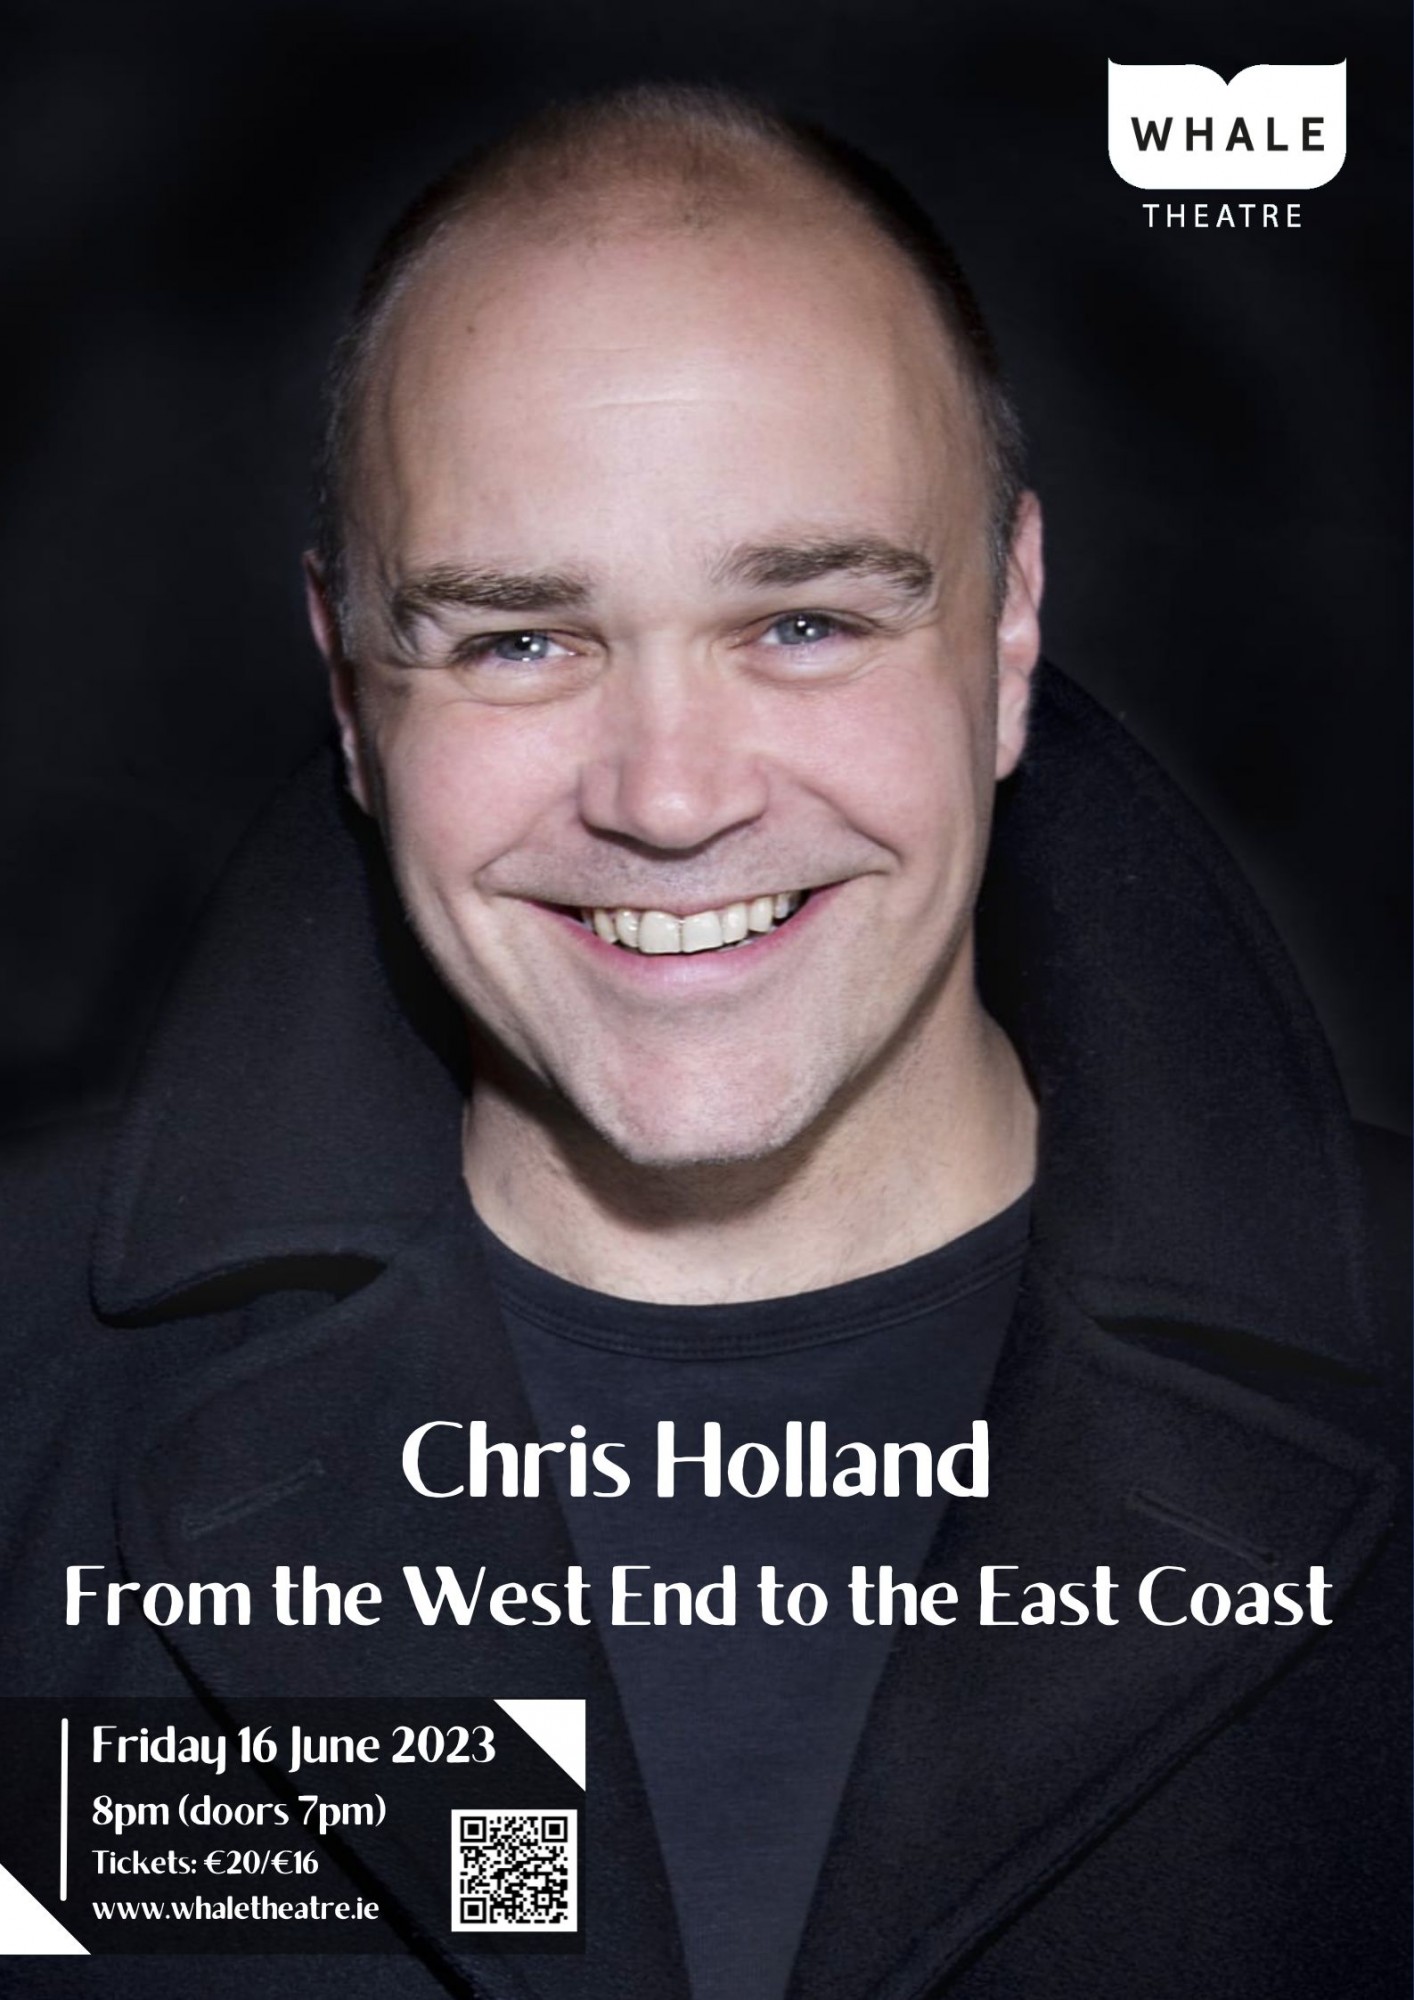 Chris Holland - From the West End to the East Coast